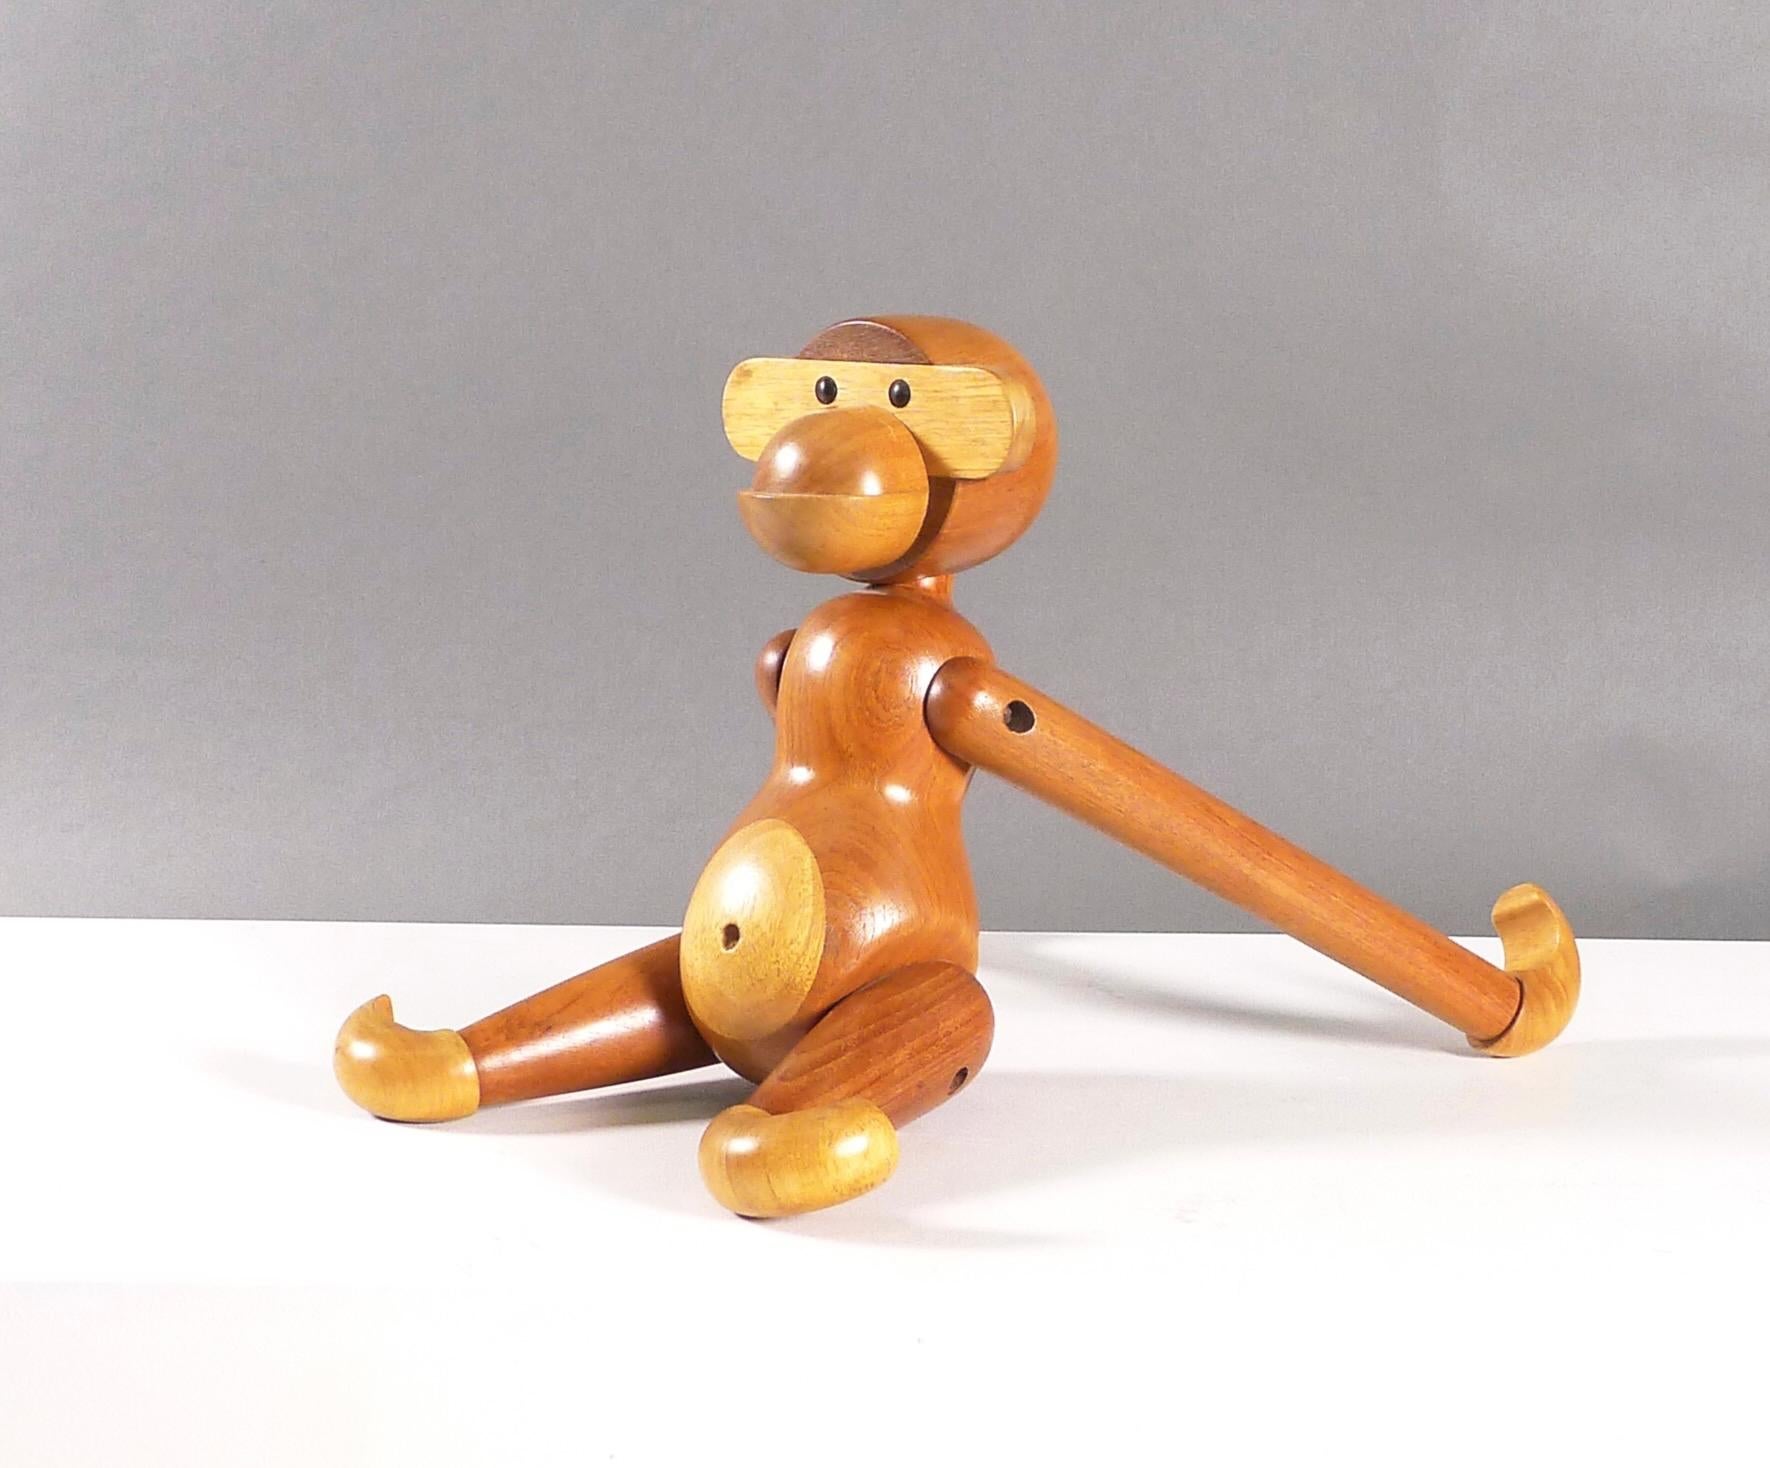 This is a vintage early example of the largest production monkey, designed by Kay Bojesen in 1951.  Constructed from teak and limba wood, the joints are articulated allowing the monkey to be placed in different positions or suspended.  This original